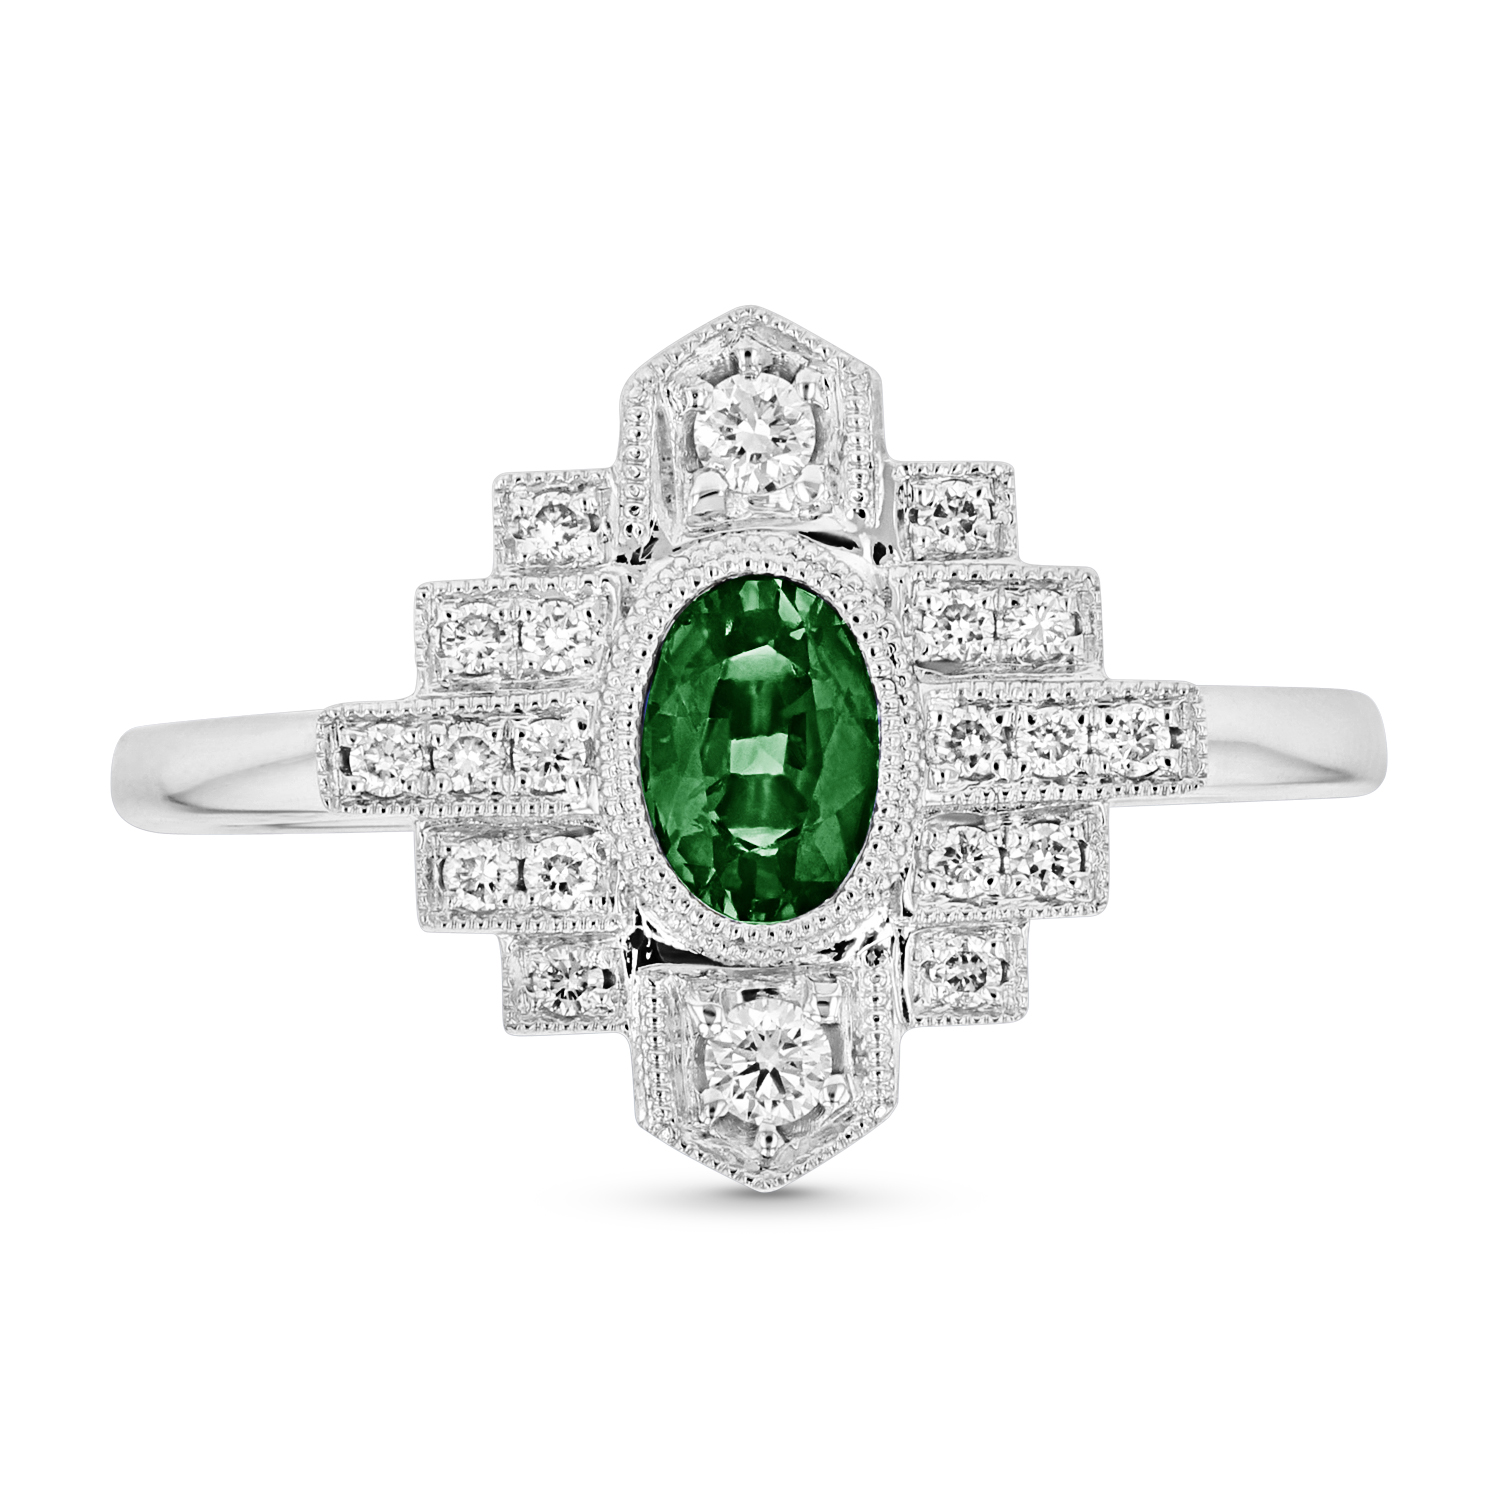 View 0.69ctw Emerald and Diamond  Ring in 14k White Gold